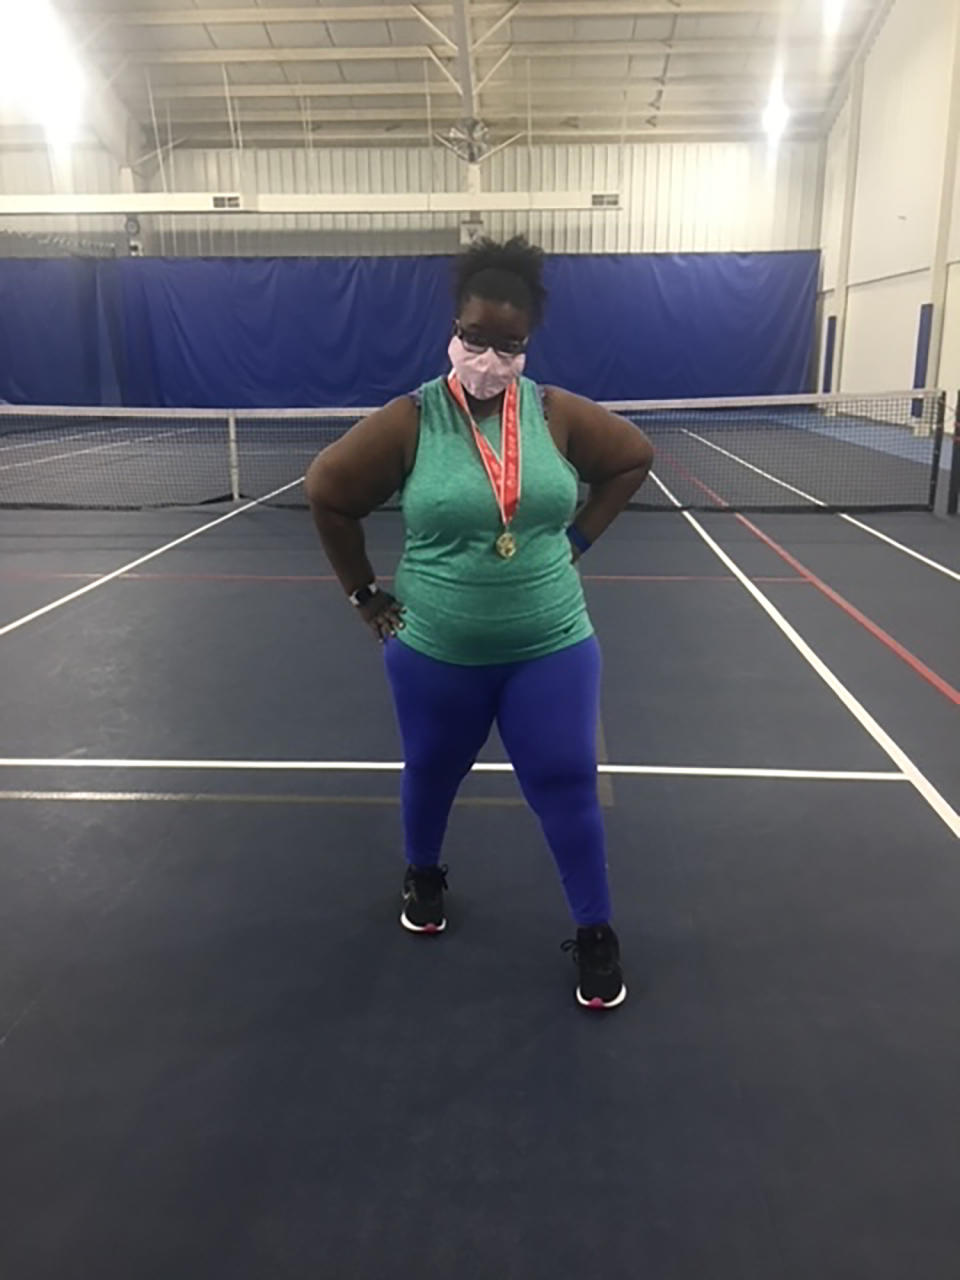 Ruqayyah Cherie Bailey pauses for a photo to celebrate taking first place in the beginners' tennis division of the Missouri Special Olympics on Oct. 3, 2020, in Jefferson City, Mo. The 31-year-old autistic St. Louis County resident was barely making enough as a part-time cafe cashier. When COVID-19 hit, the cafe closed, she lost her job and moved home with her mom. By any measure, Ruqayyah Bailey has had a tough year, but she is focused on her accomplishments, not her challenges. "I did it! I did it! I worked hard and I did it!" she said when asked what the photo means to her. (Pat Hawkins via AP)